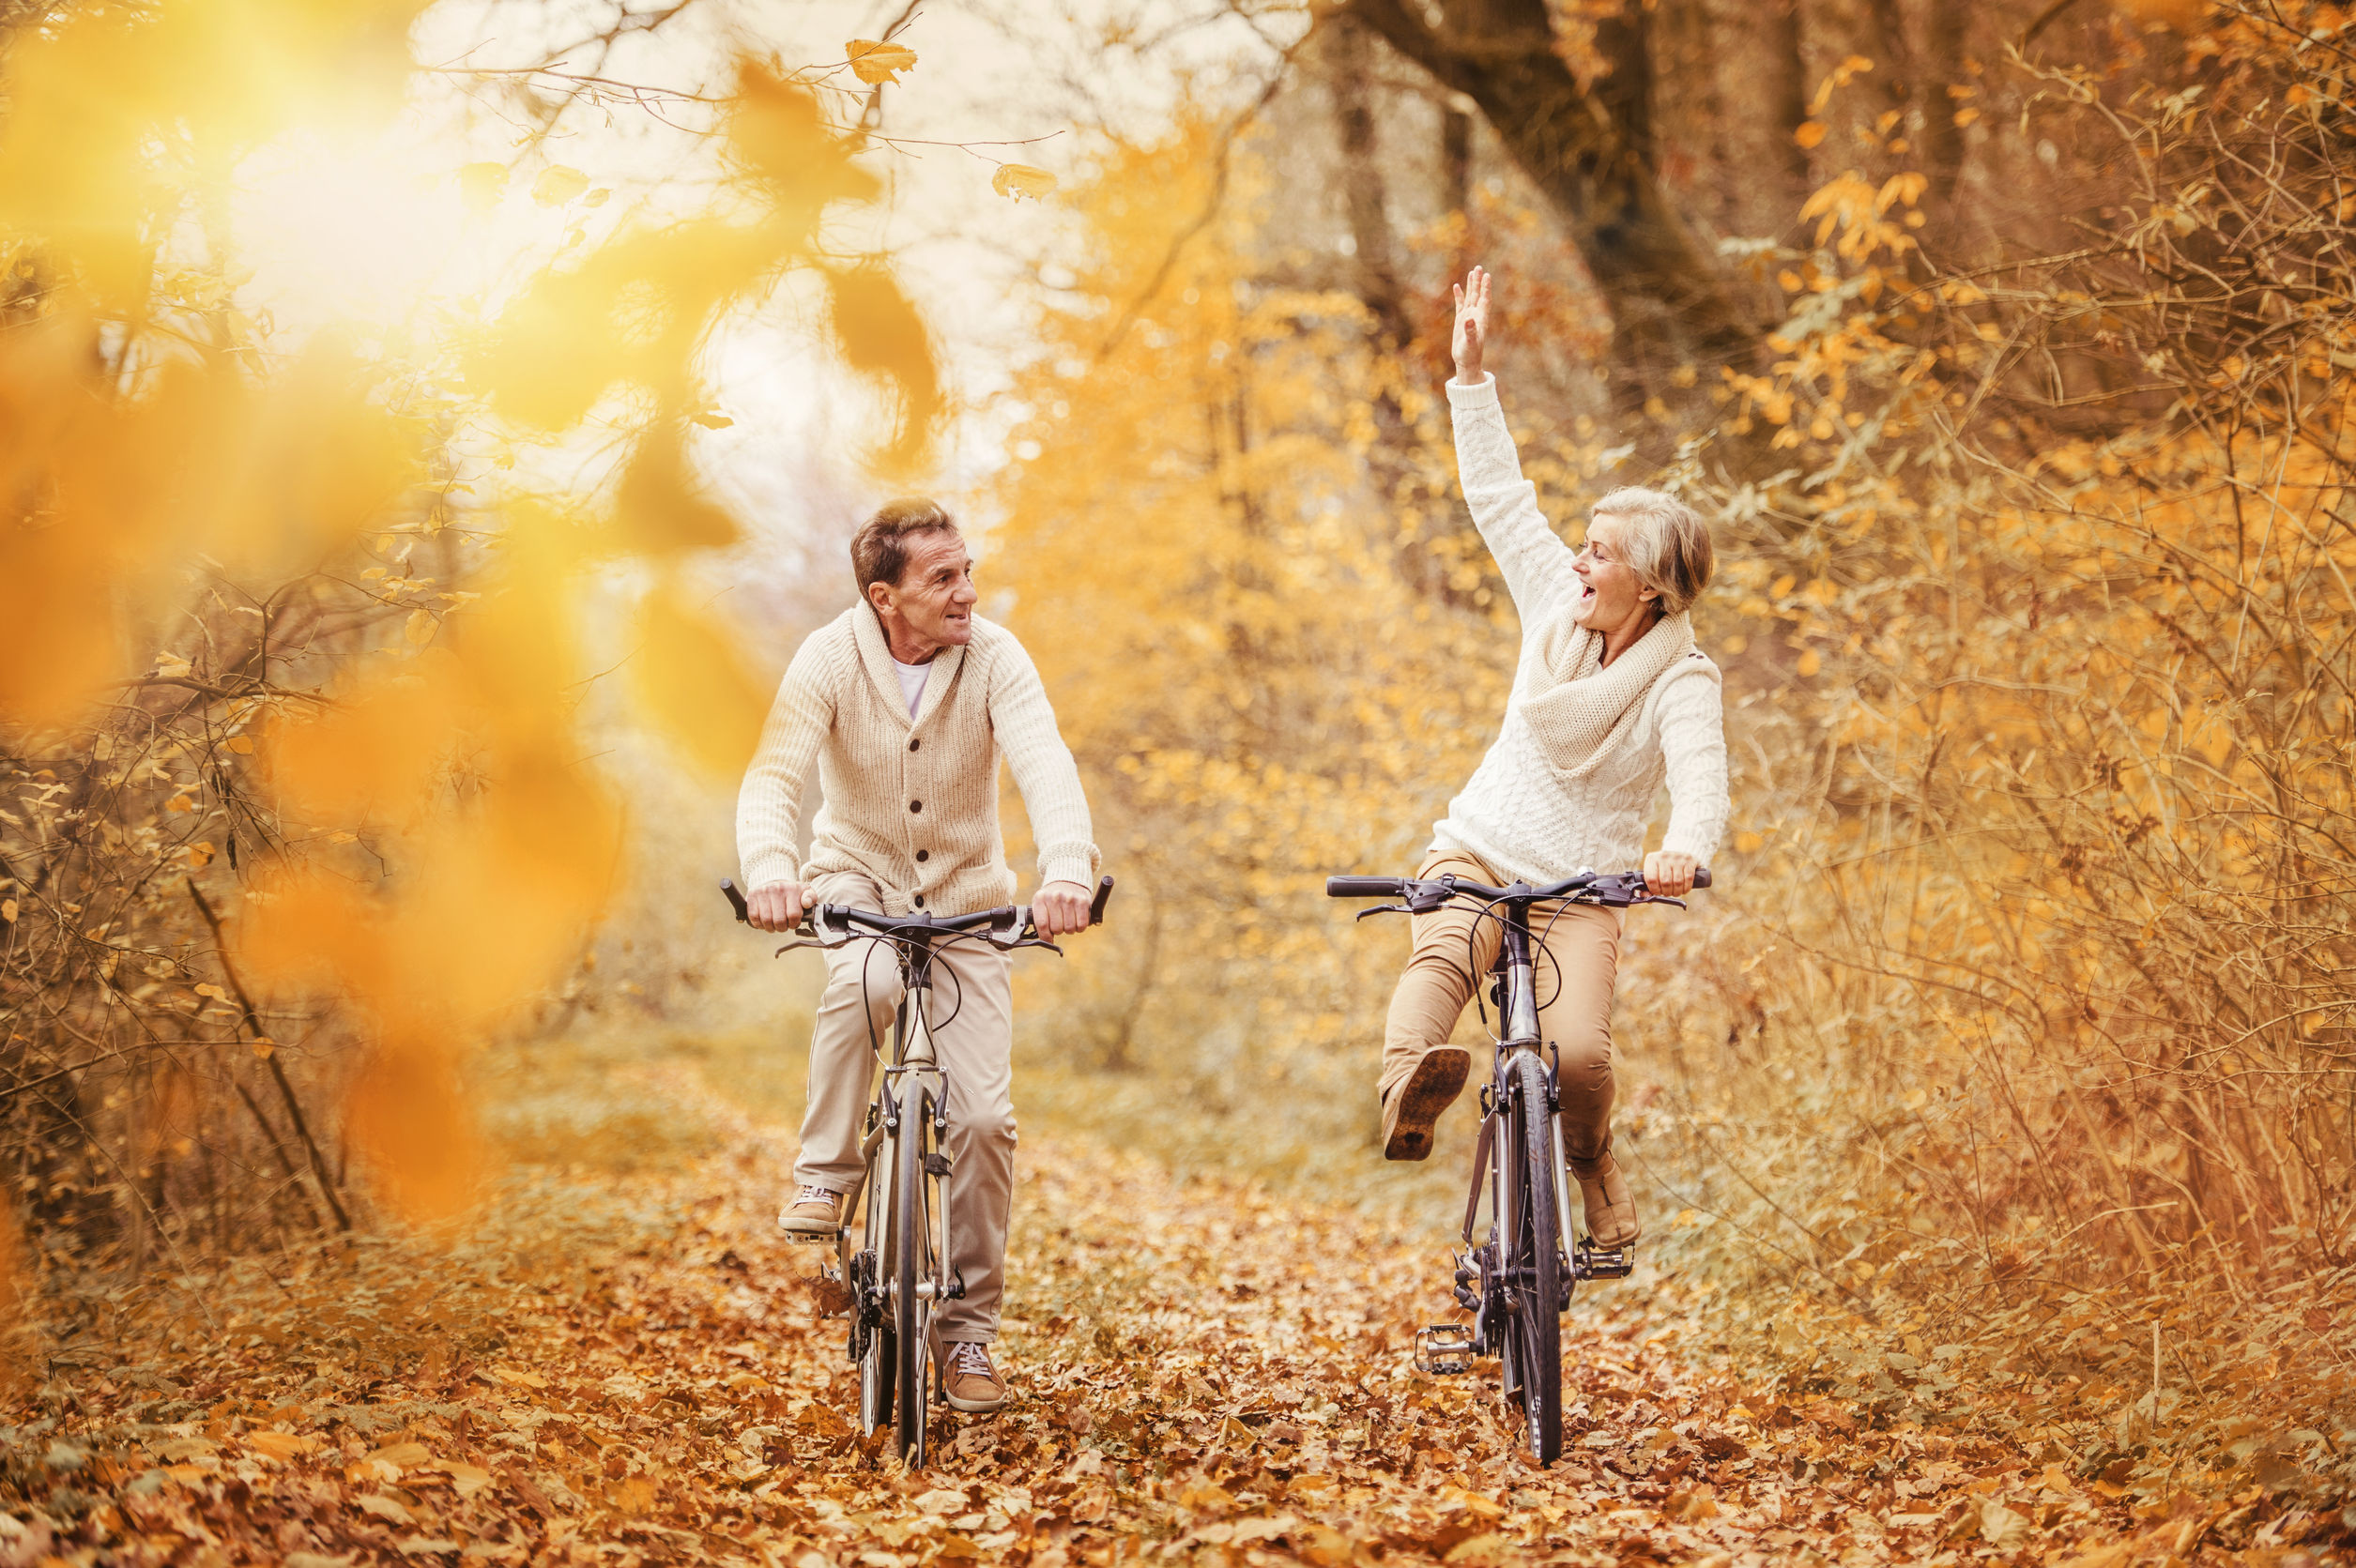 active seniors ridding bike in autumn nature. they having fun outdoor.